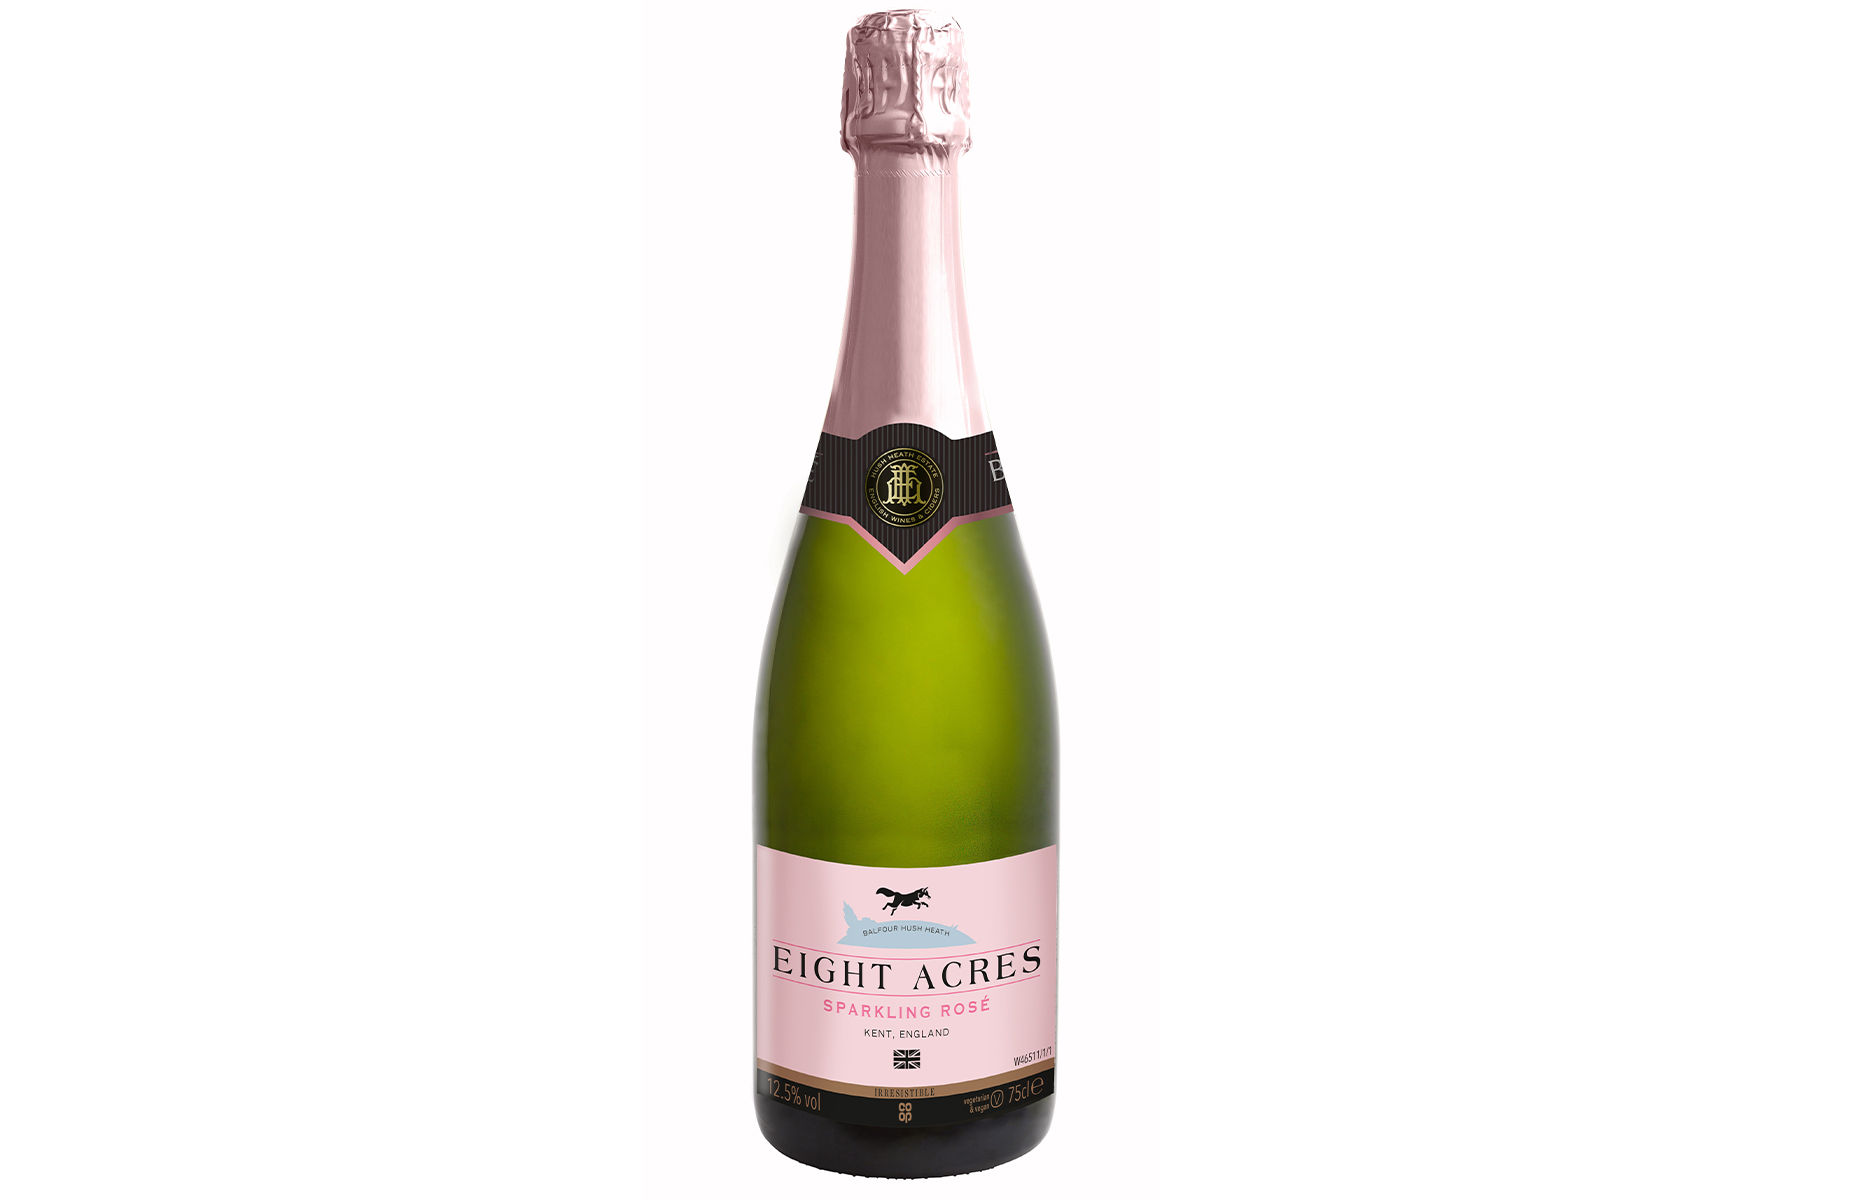 Co-op Irresistible Eight Acres Sparkling Rose  (Image: Courtesy of Co-op)